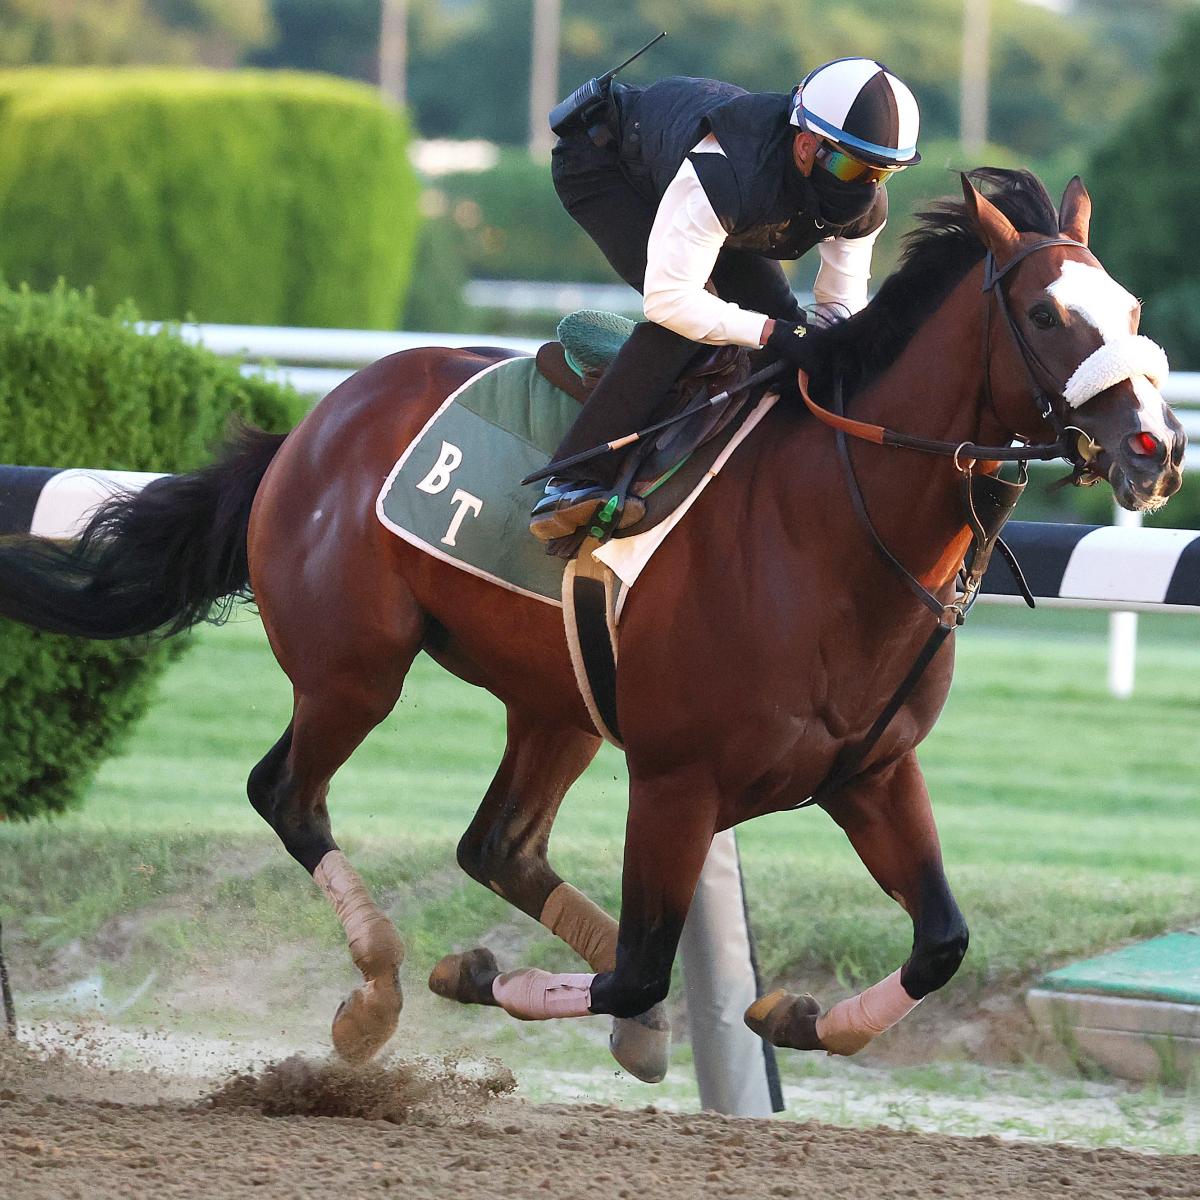 Belmont Stakes 2020 Contenders Horse Pedigree and Jockey Info for Top